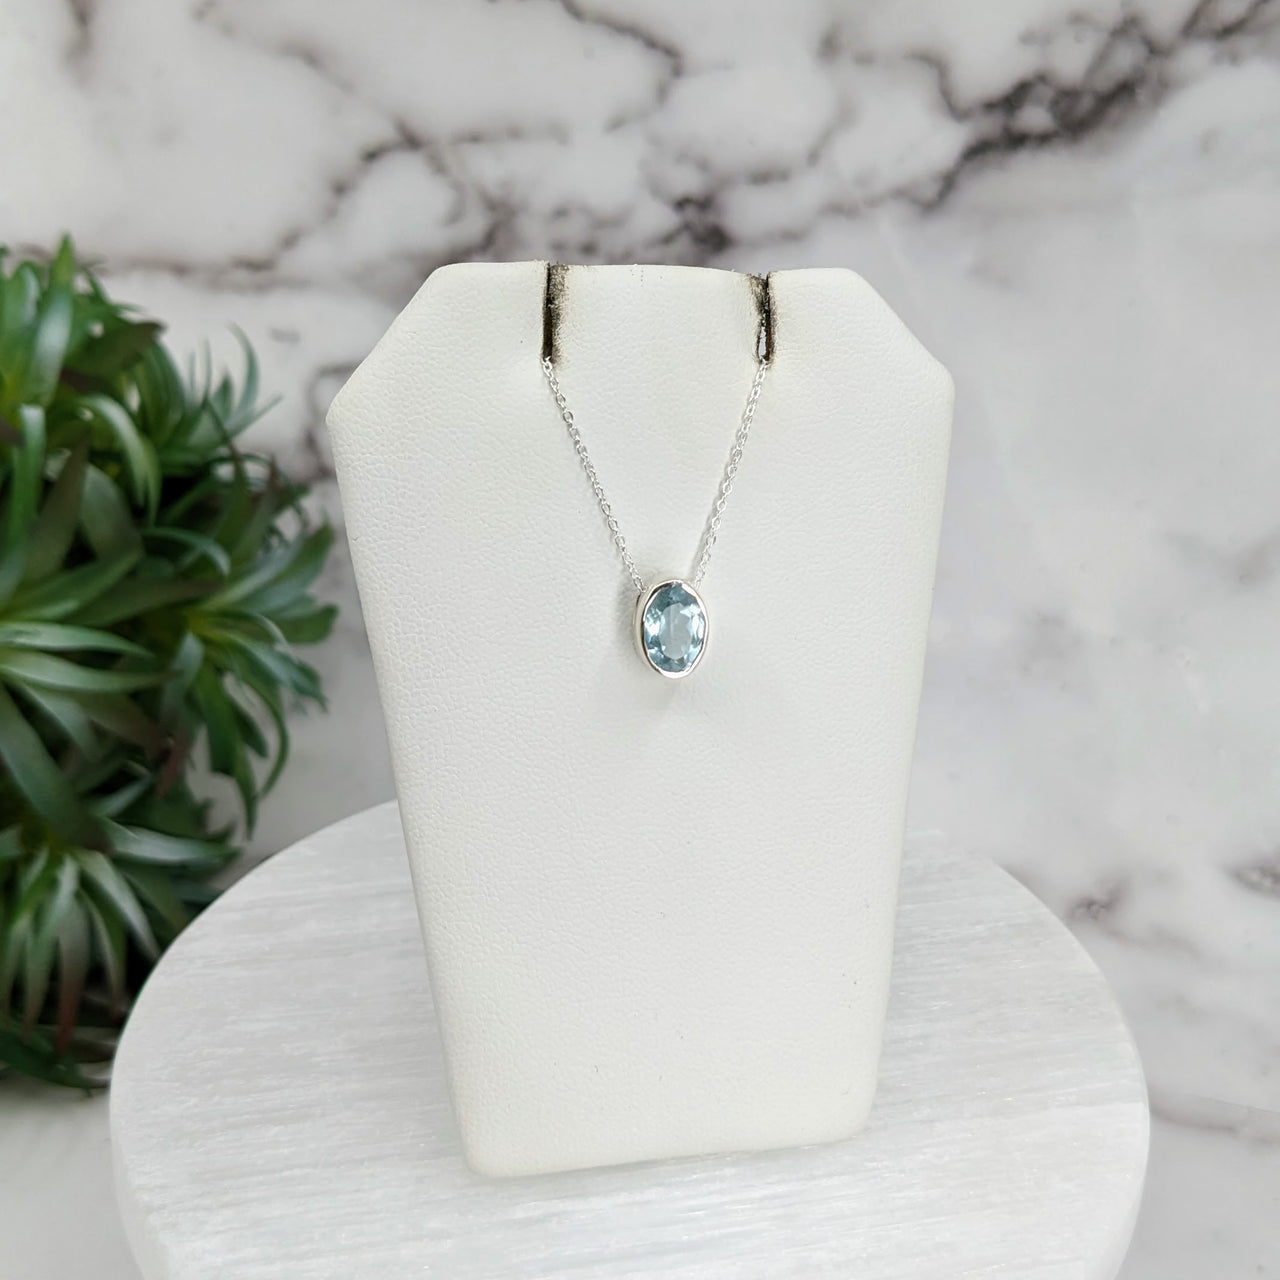 Aquamarine Faceted Necklace Sterling Silver Slider Pendant on 18" Chain #LV3253